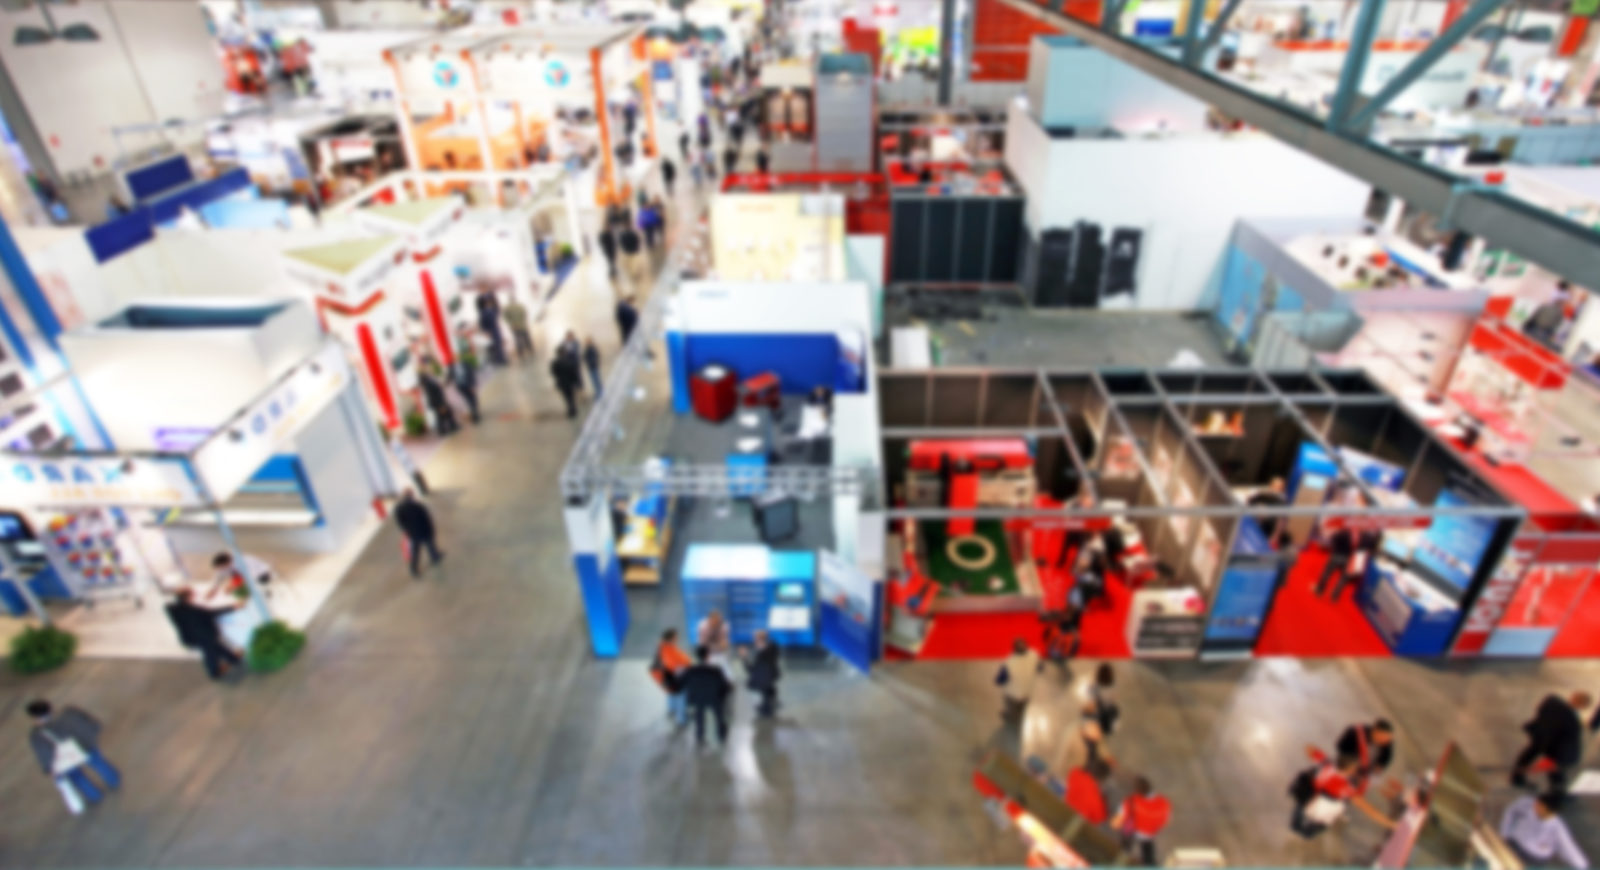 5 Interactive Rentals That Will Draw Crowds to Your Trade Show or Exposition Booth